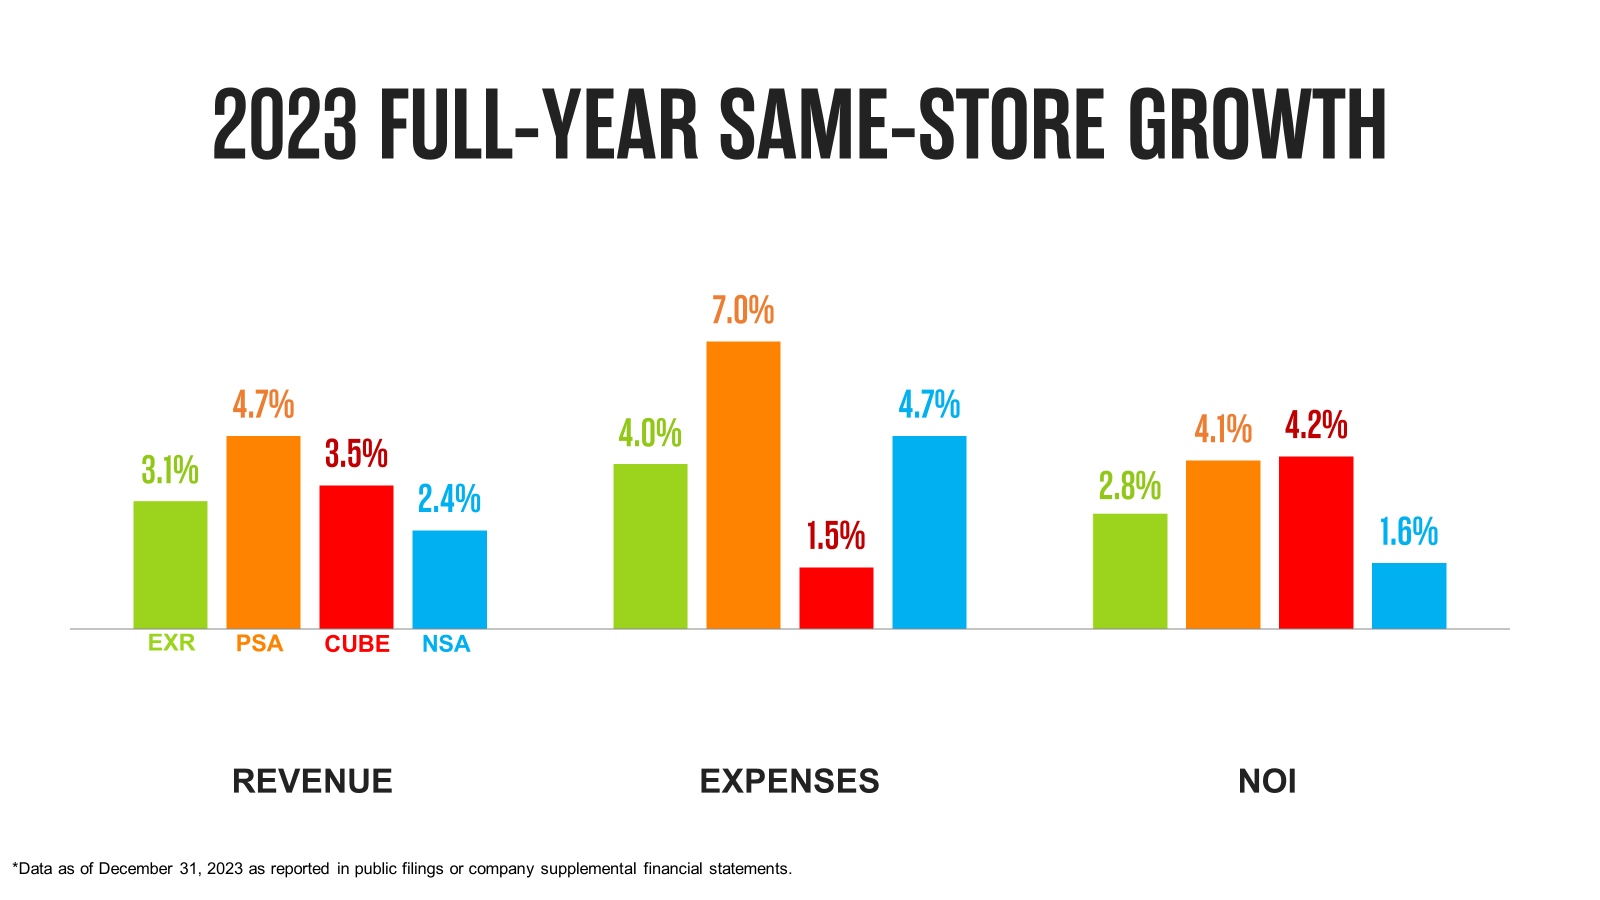 2022 Full-Year Same-Store Growth